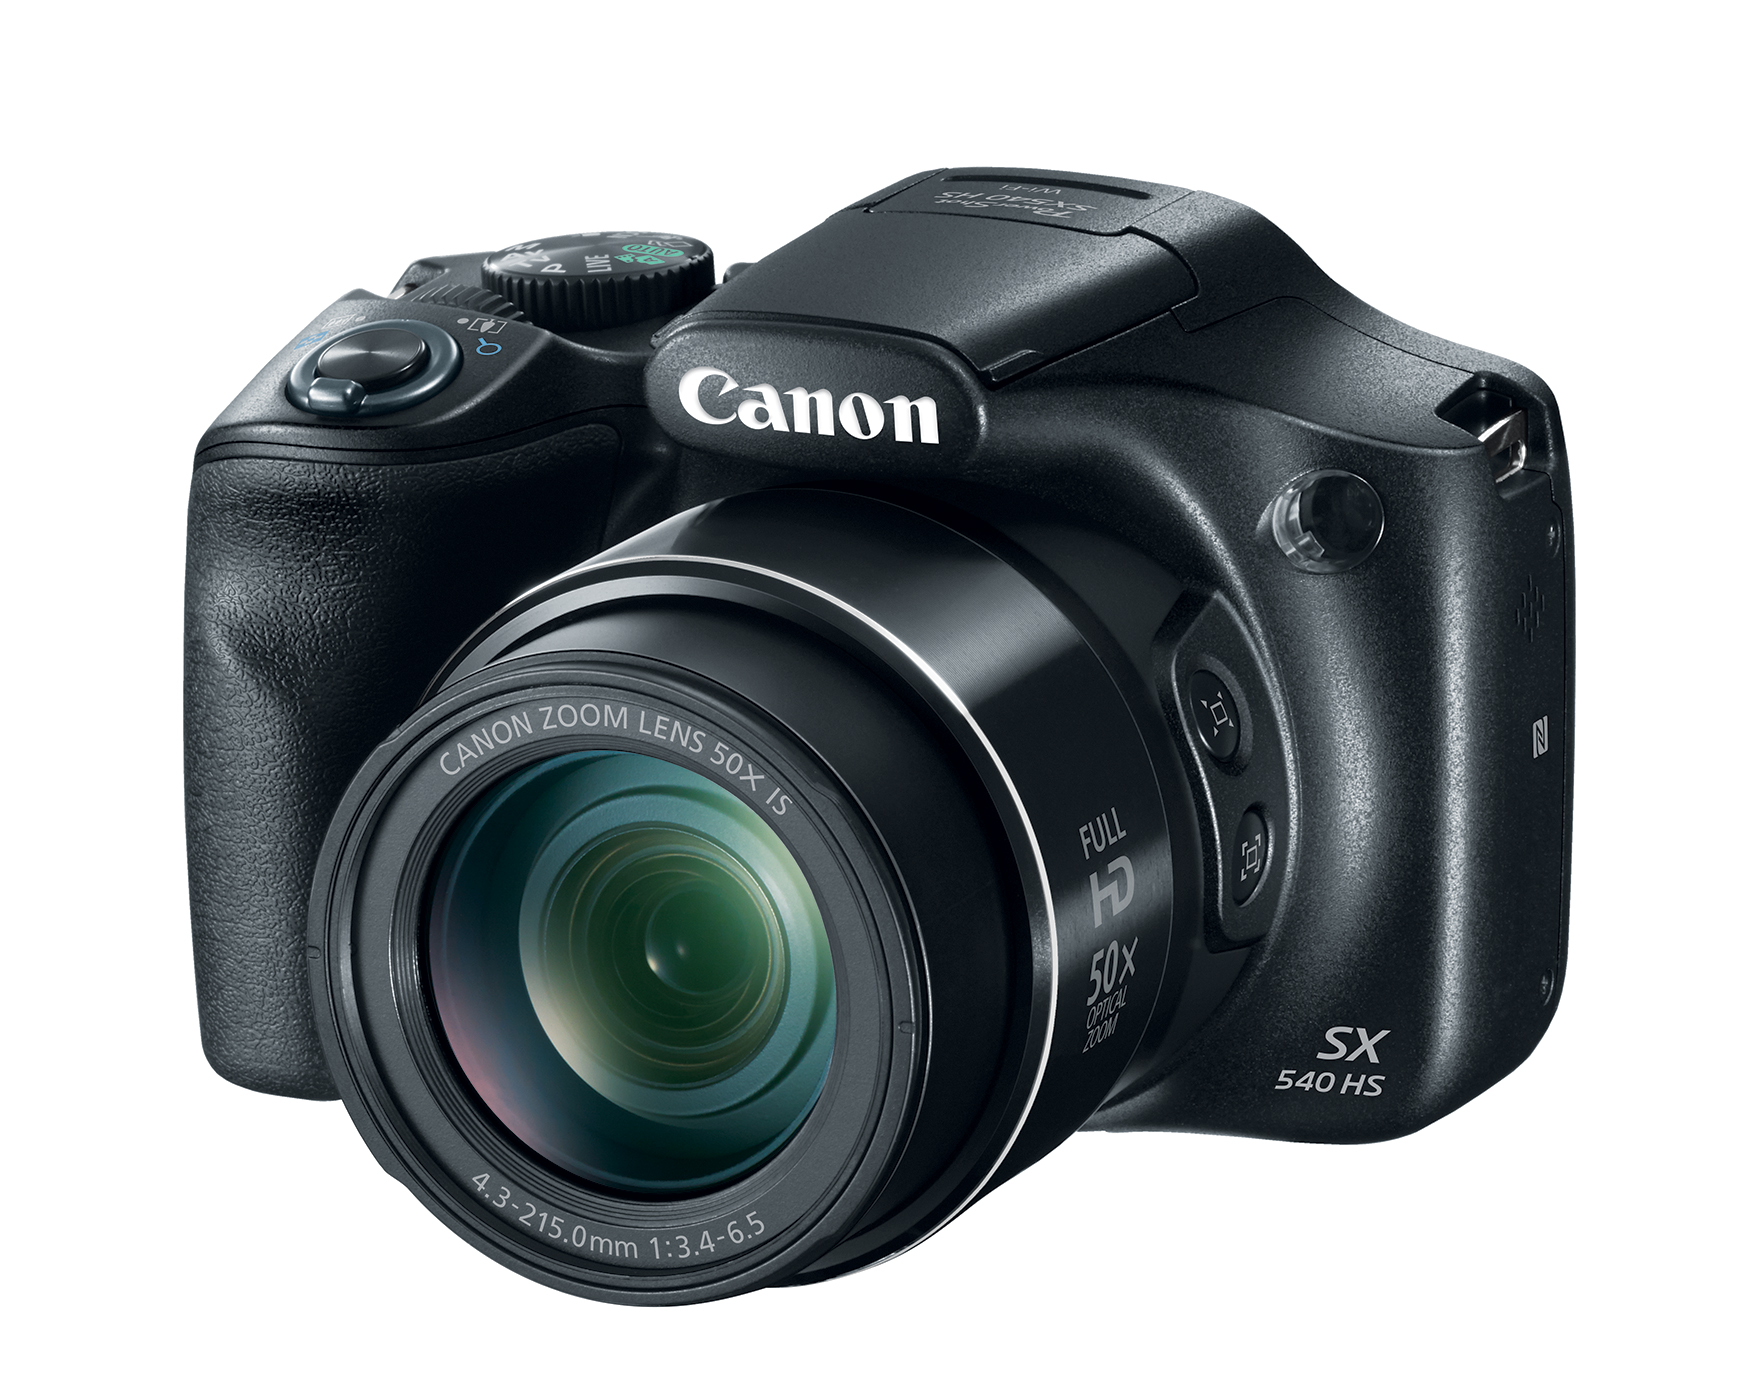 New Canon PowerShot Cameras Are for the Average Person